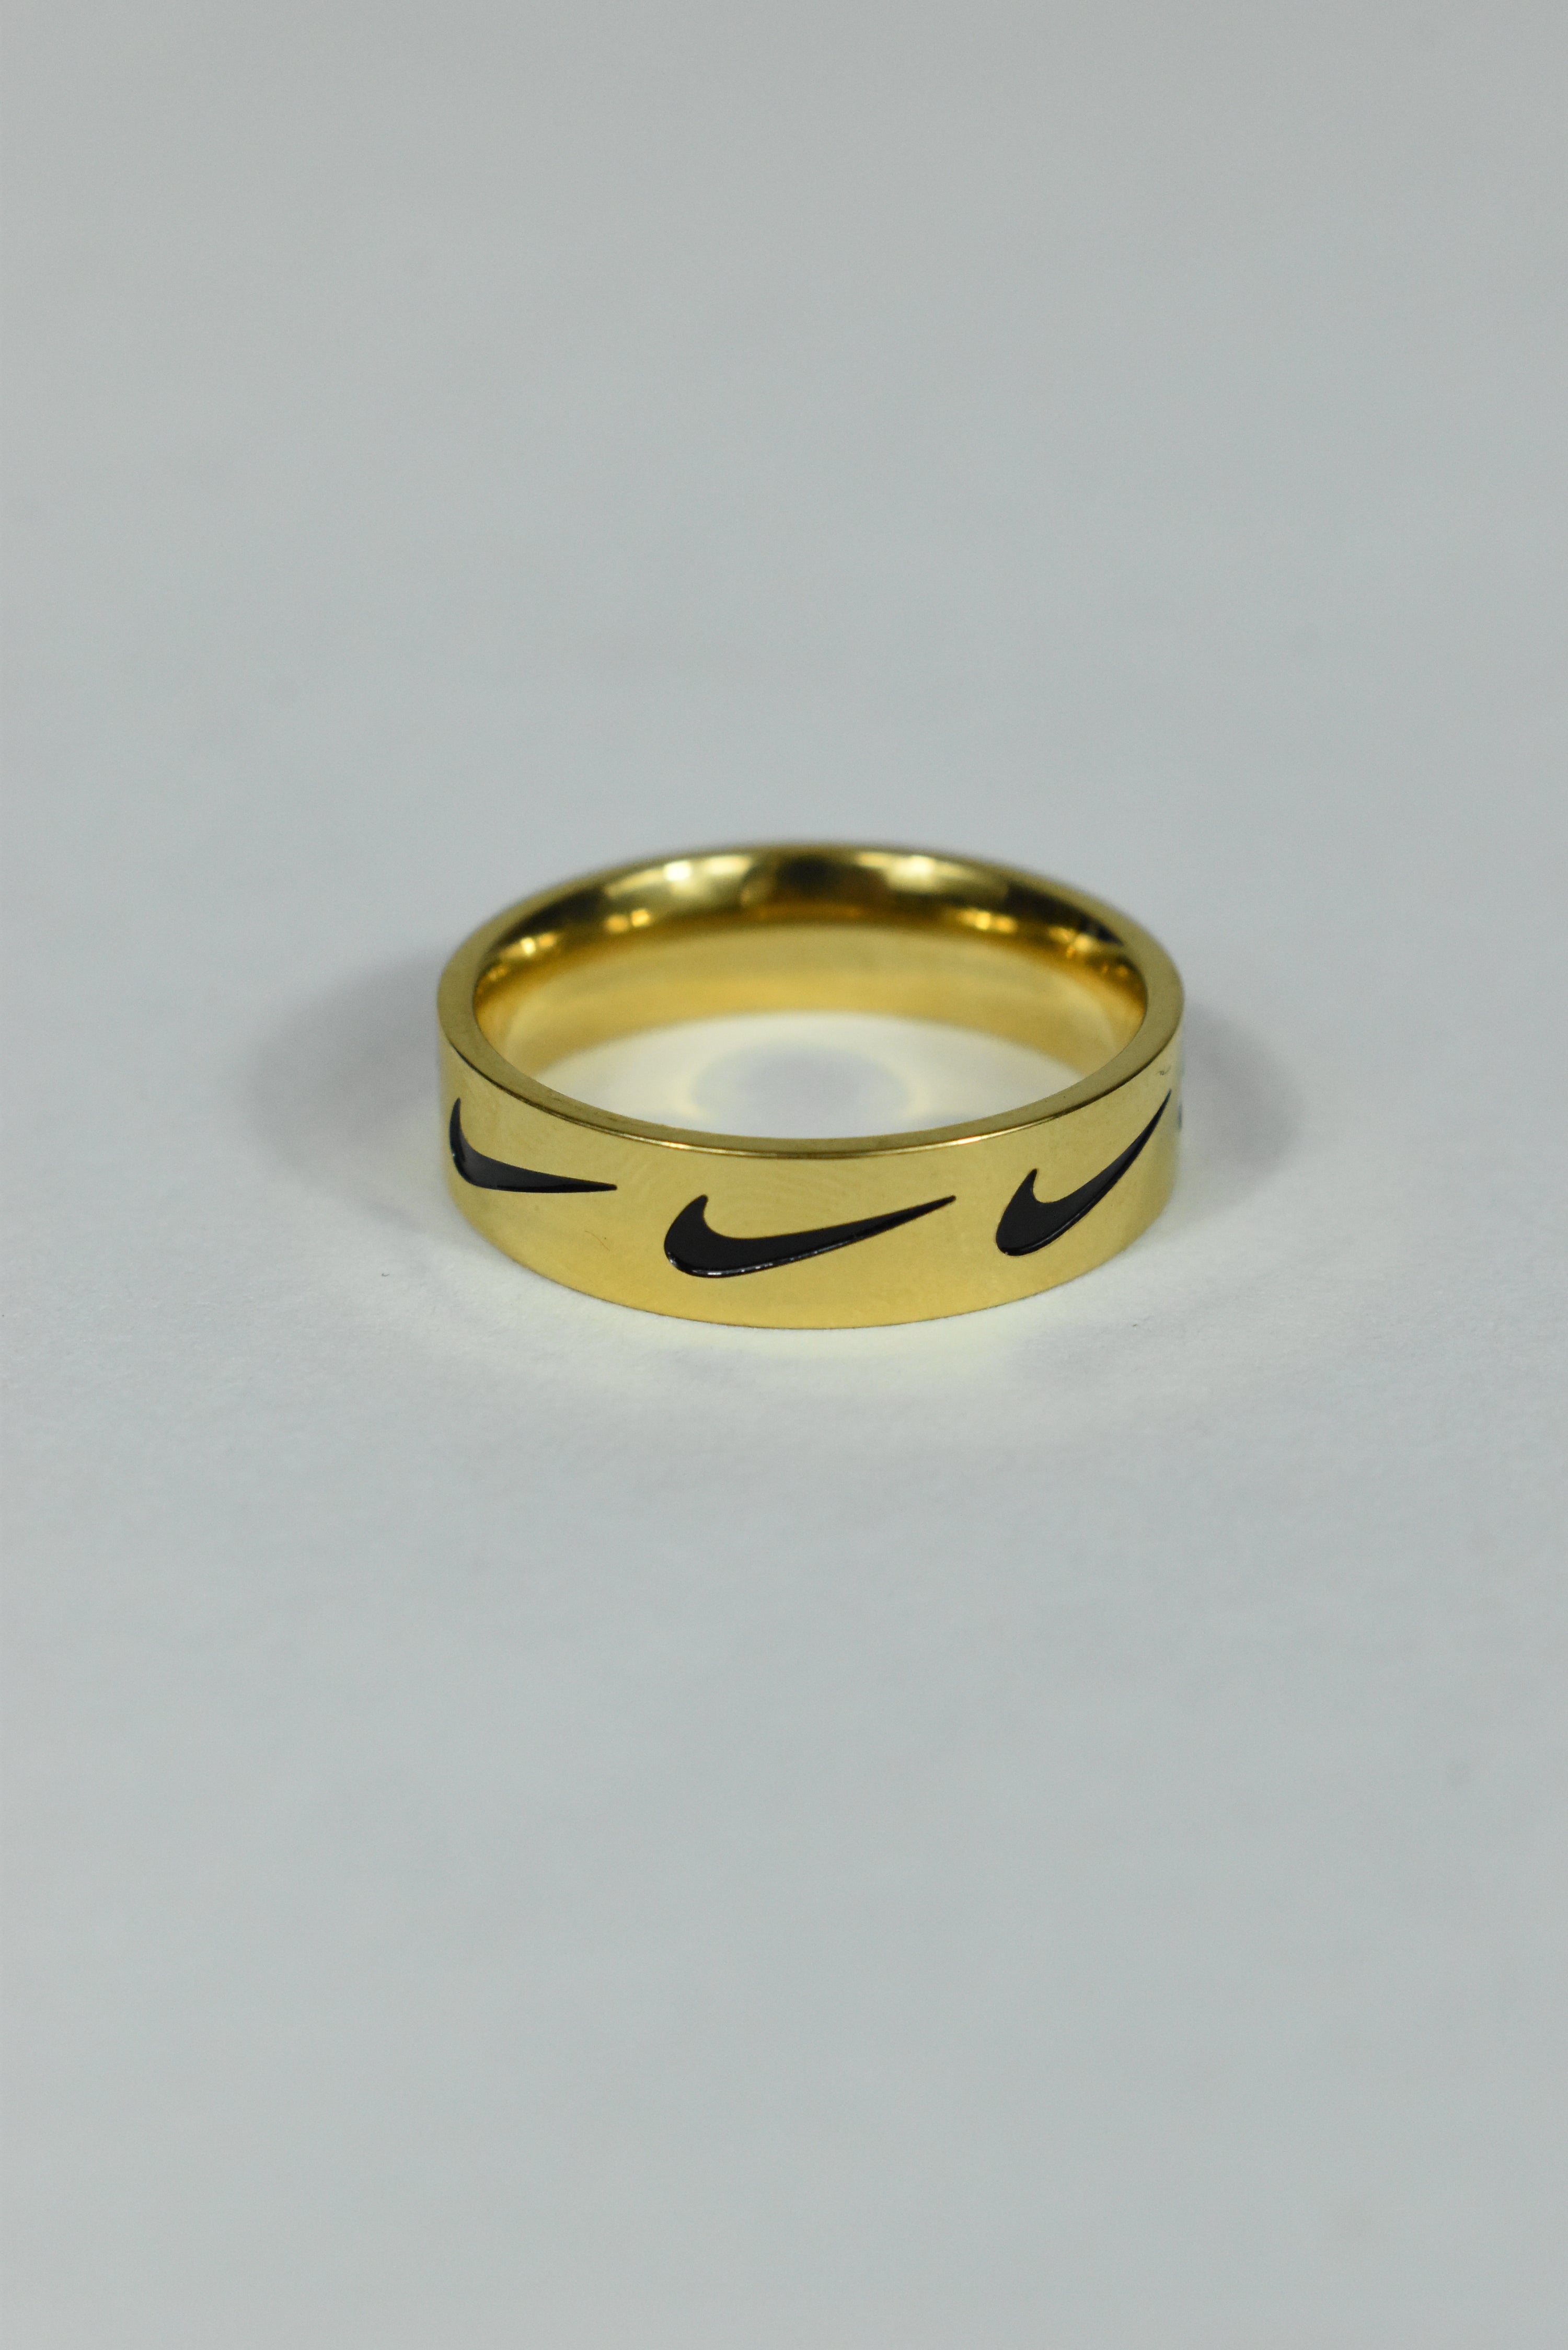 New Nike Swoosh Ring Stainless Steel Gold